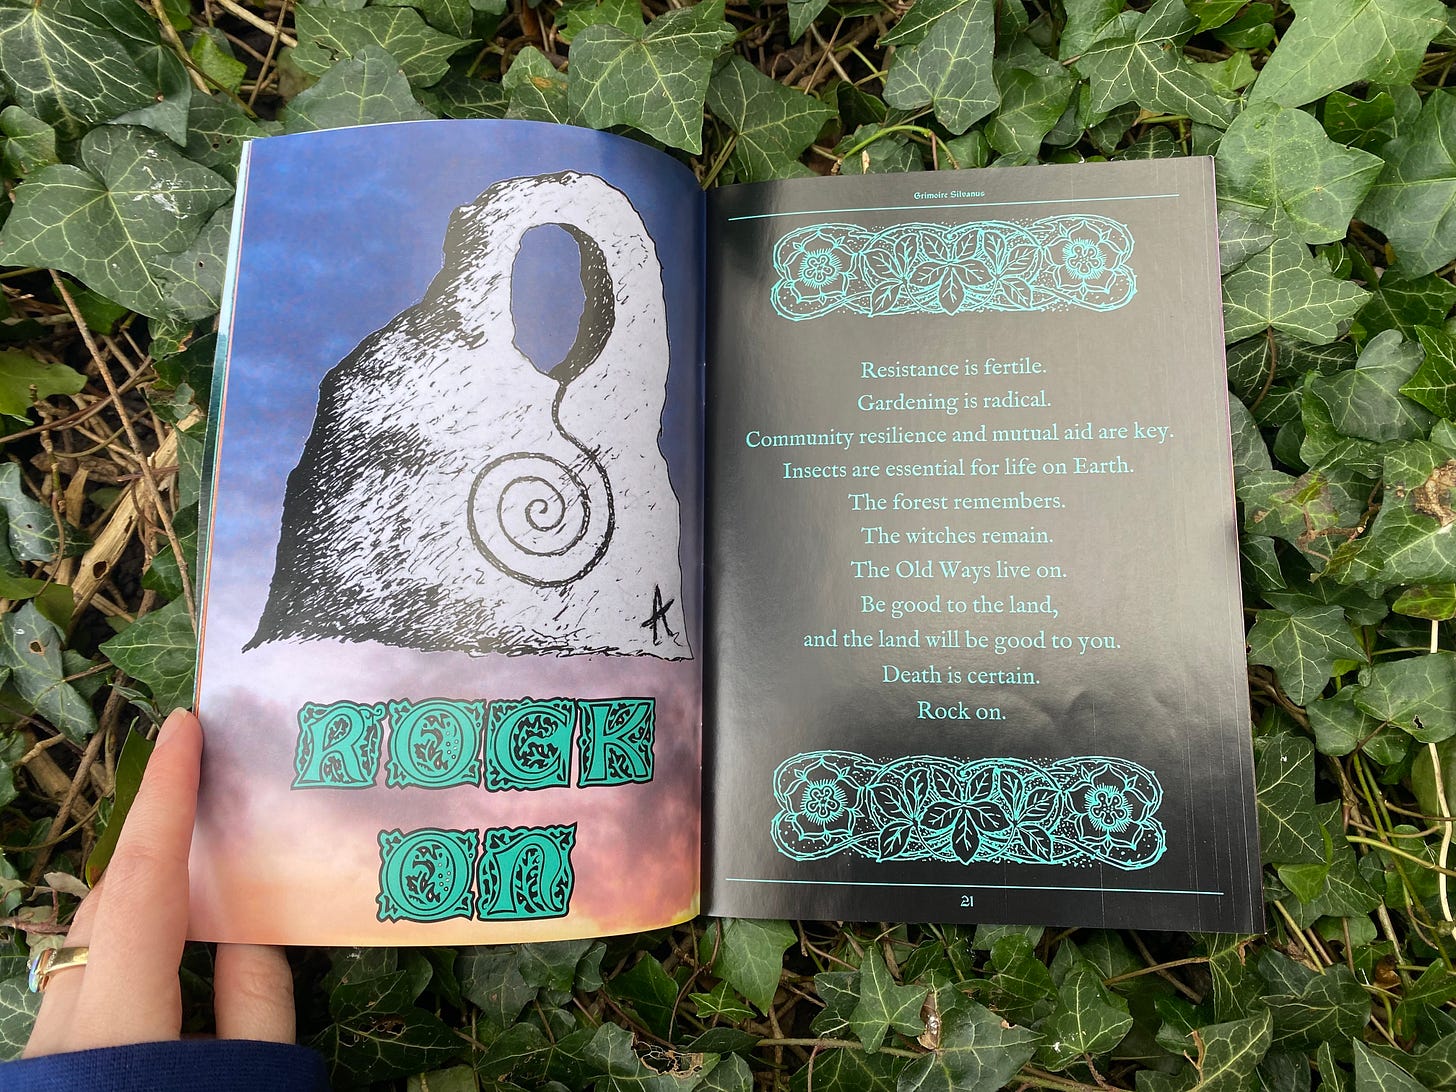 A double page spread of Grimoire Silvanus 7: a drawing of a rock superimposed onto a photo of a sunset with caption "Rock On", and a page of mantras beginning "Resistance is fertile".